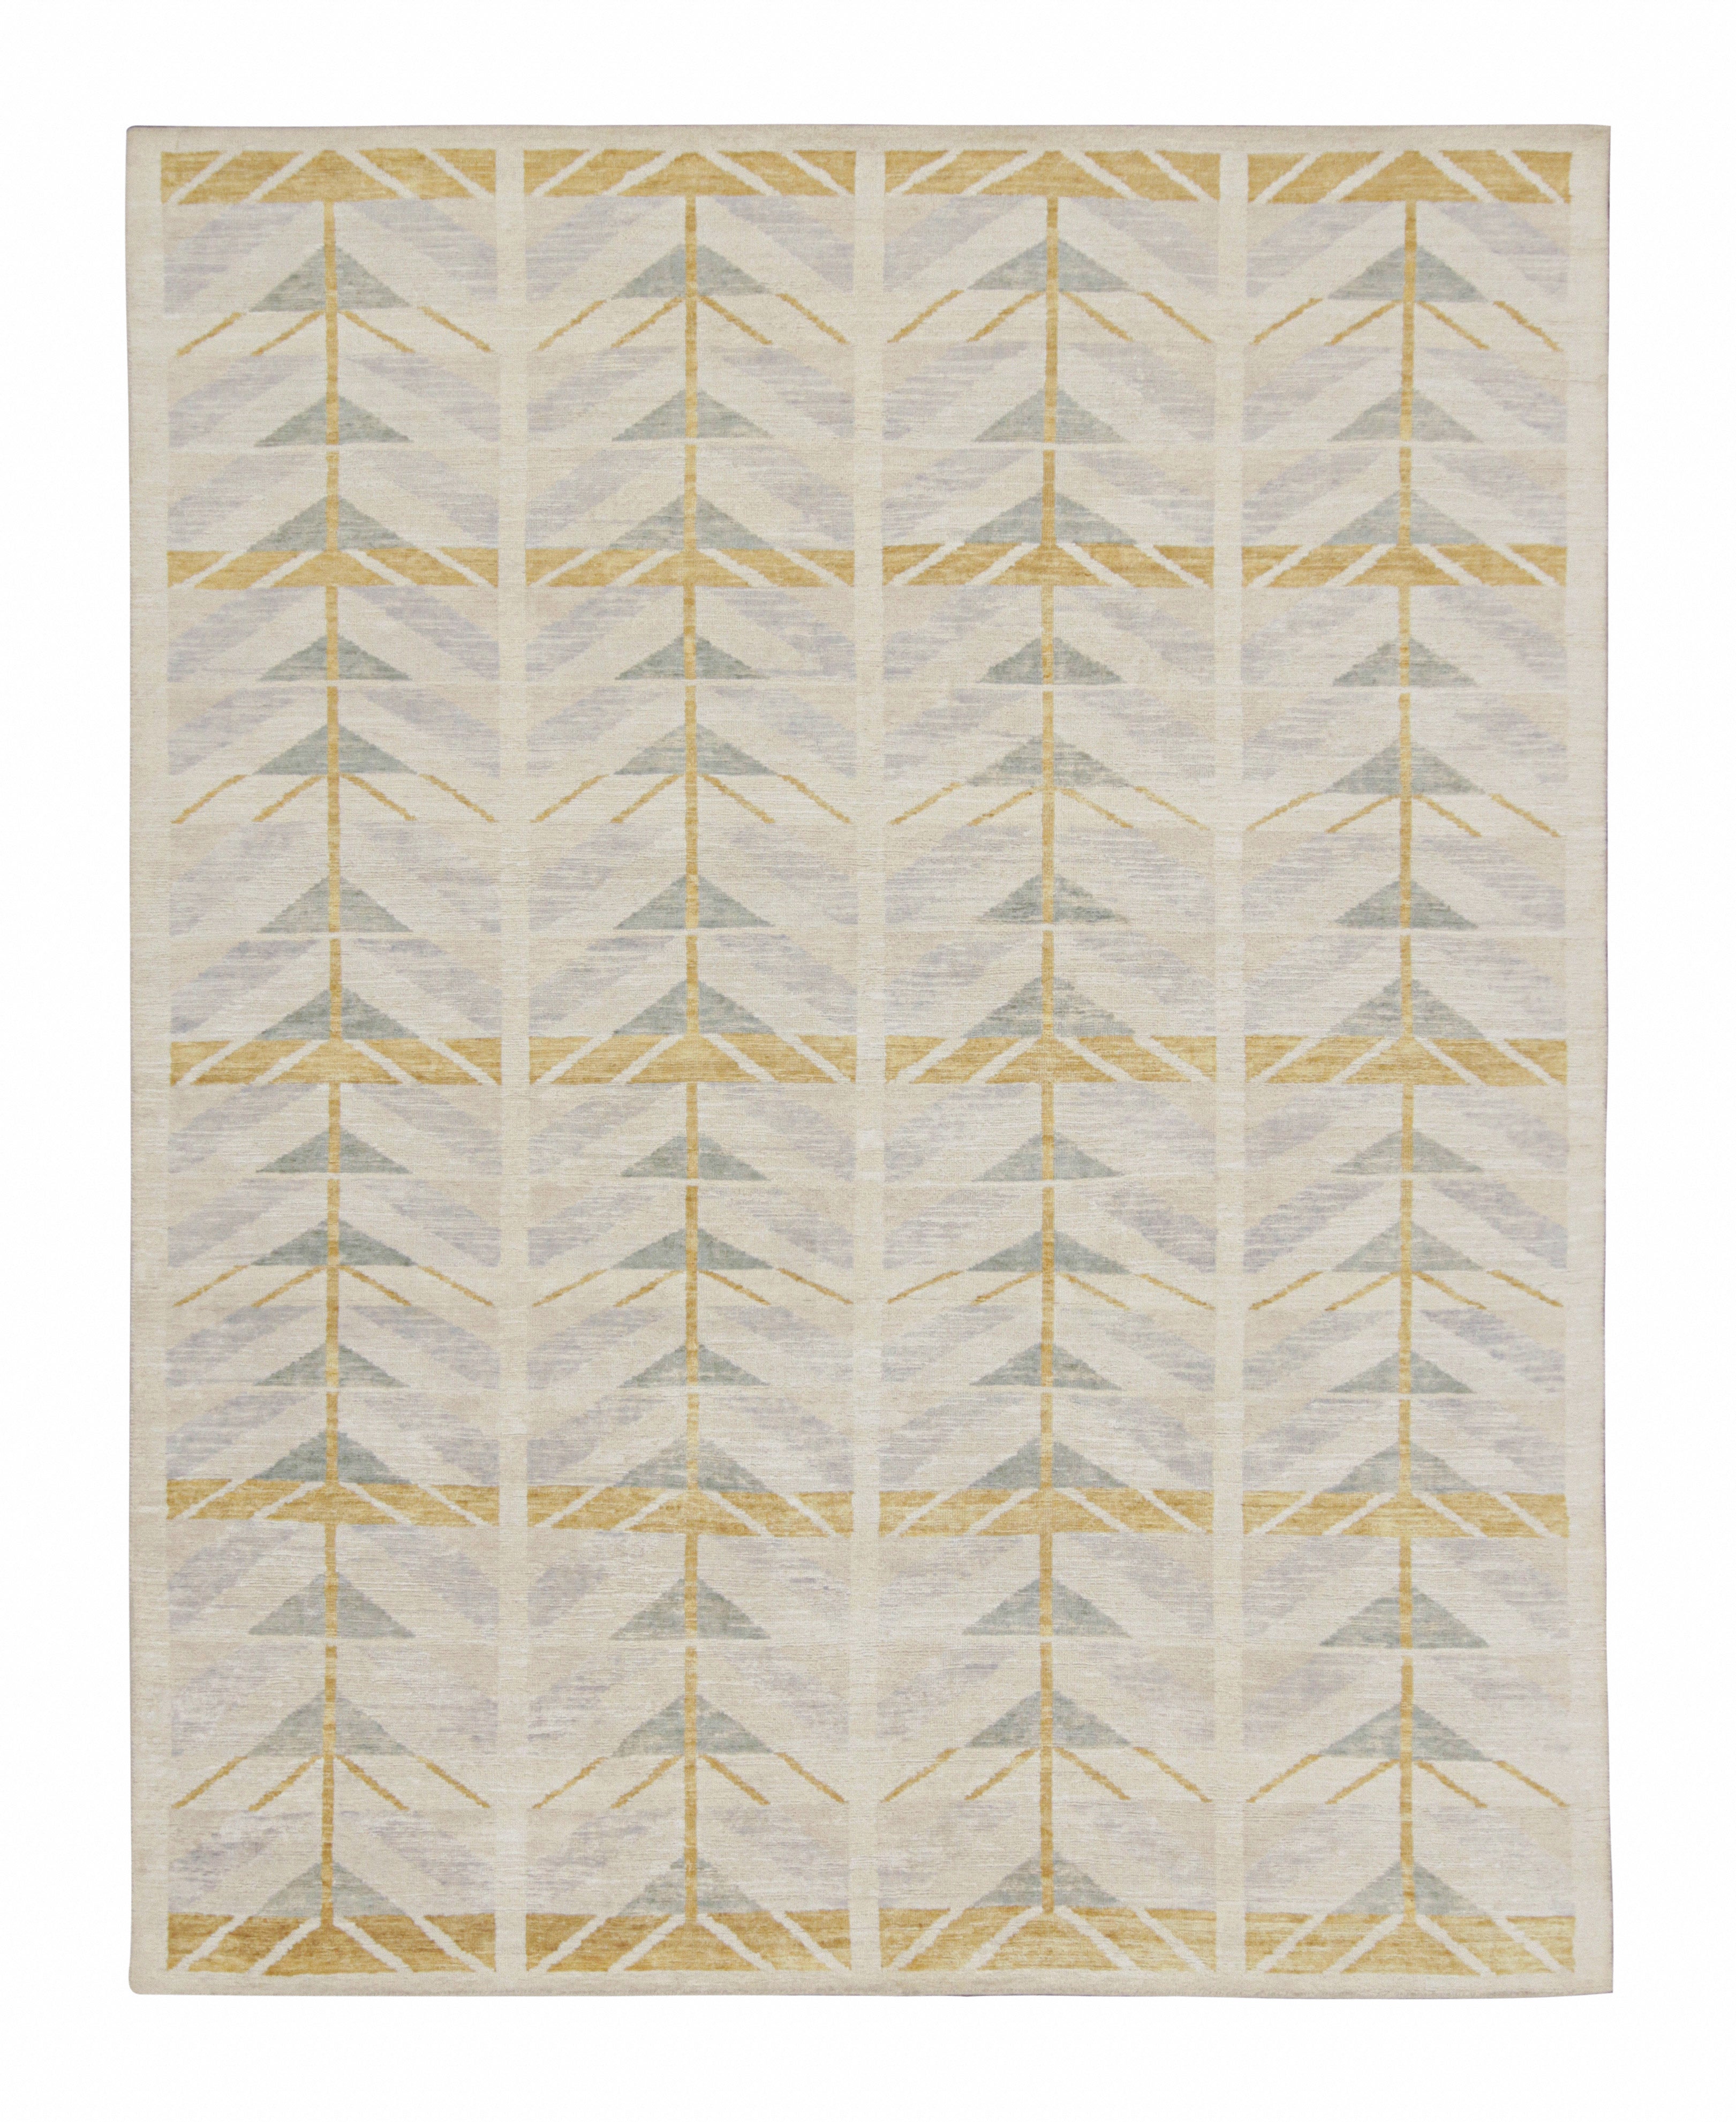 Rug & Kilim’s Scandinavian-Style Rug with Gold & Beige Geometric Patterns For Sale